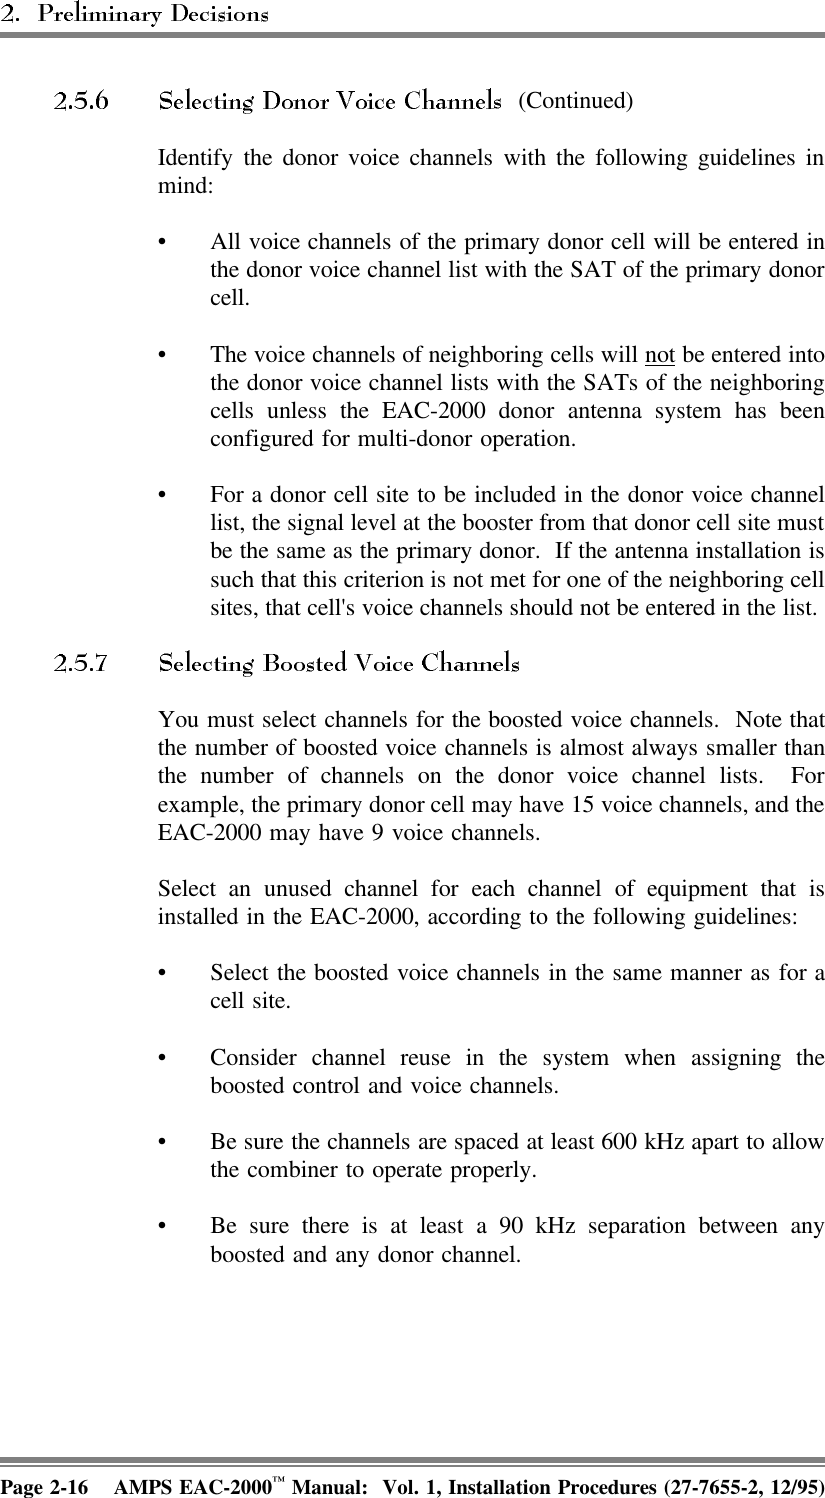  (Continued)Identify the donor voice channels with the following guidelines inmind:• All voice channels of the primary donor cell will be entered inthe donor voice channel list with the SAT of the primary donorcell.• The voice channels of neighboring cells will not be entered intothe donor voice channel lists with the SATs of the neighboringcells unless the EAC-2000 donor antenna system has beenconfigured for multi-donor operation.• For a donor cell site to be included in the donor voice channellist, the signal level at the booster from that donor cell site mustbe the same as the primary donor.  If the antenna installation issuch that this criterion is not met for one of the neighboring cellsites, that cell&apos;s voice channels should not be entered in the list. You must select channels for the boosted voice channels.  Note thatthe number of boosted voice channels is almost always smaller thanthe number of channels on the donor voice channel lists.  Forexample, the primary donor cell may have 15 voice channels, and theEAC-2000 may have 9 voice channels.Select an unused channel for each channel of equipment that isinstalled in the EAC-2000, according to the following guidelines: • Select the boosted voice channels in the same manner as for acell site.• Consider channel reuse in the system when assigning theboosted control and voice channels.• Be sure the channels are spaced at least 600 kHz apart to allowthe combiner to operate properly.• Be sure there is at least a 90 kHz separation between anyboosted and any donor channel. Page 2-16 AMPS EAC-2000™ Manual:  Vol. 1, Installation Procedures (27-7655-2, 12/95)